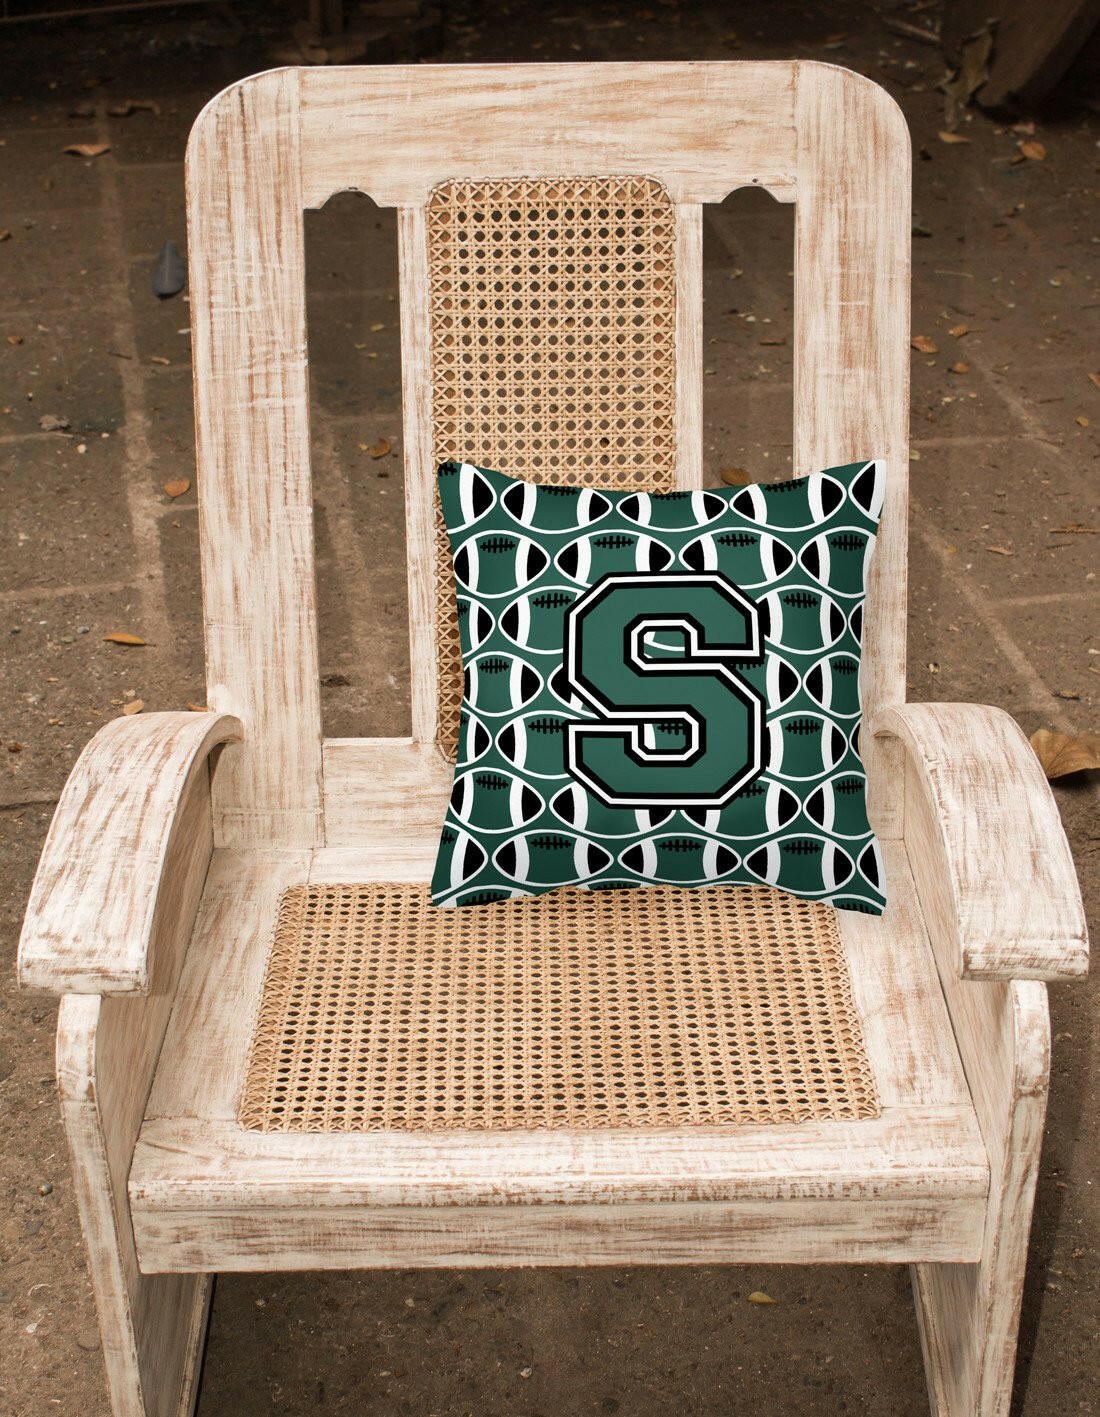 Letter S Football Green and White Fabric Decorative Pillow CJ1071-SPW1414 by Caroline's Treasures